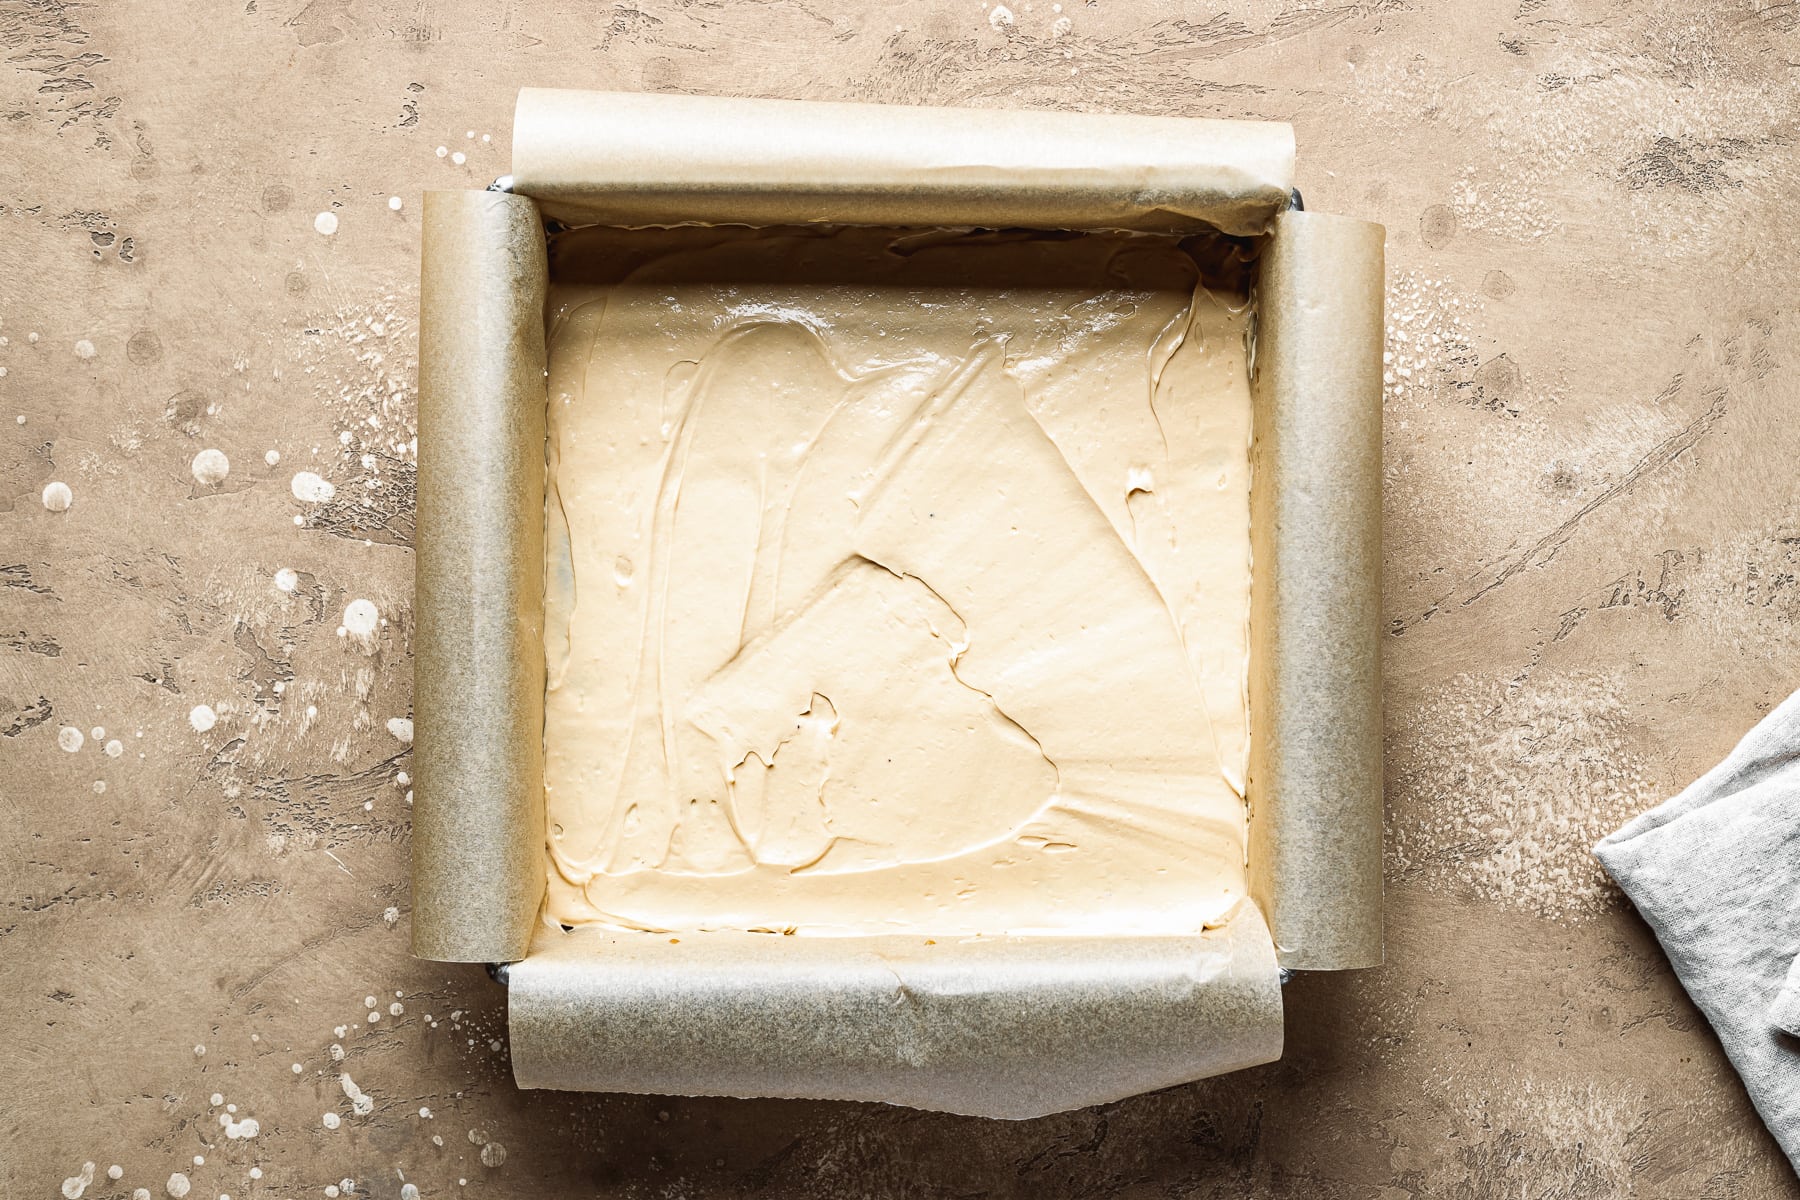 A recipe process photo showing a smooth layer of dulce de leche filling in a square pan. The pan sits on a tan textured stone surface.